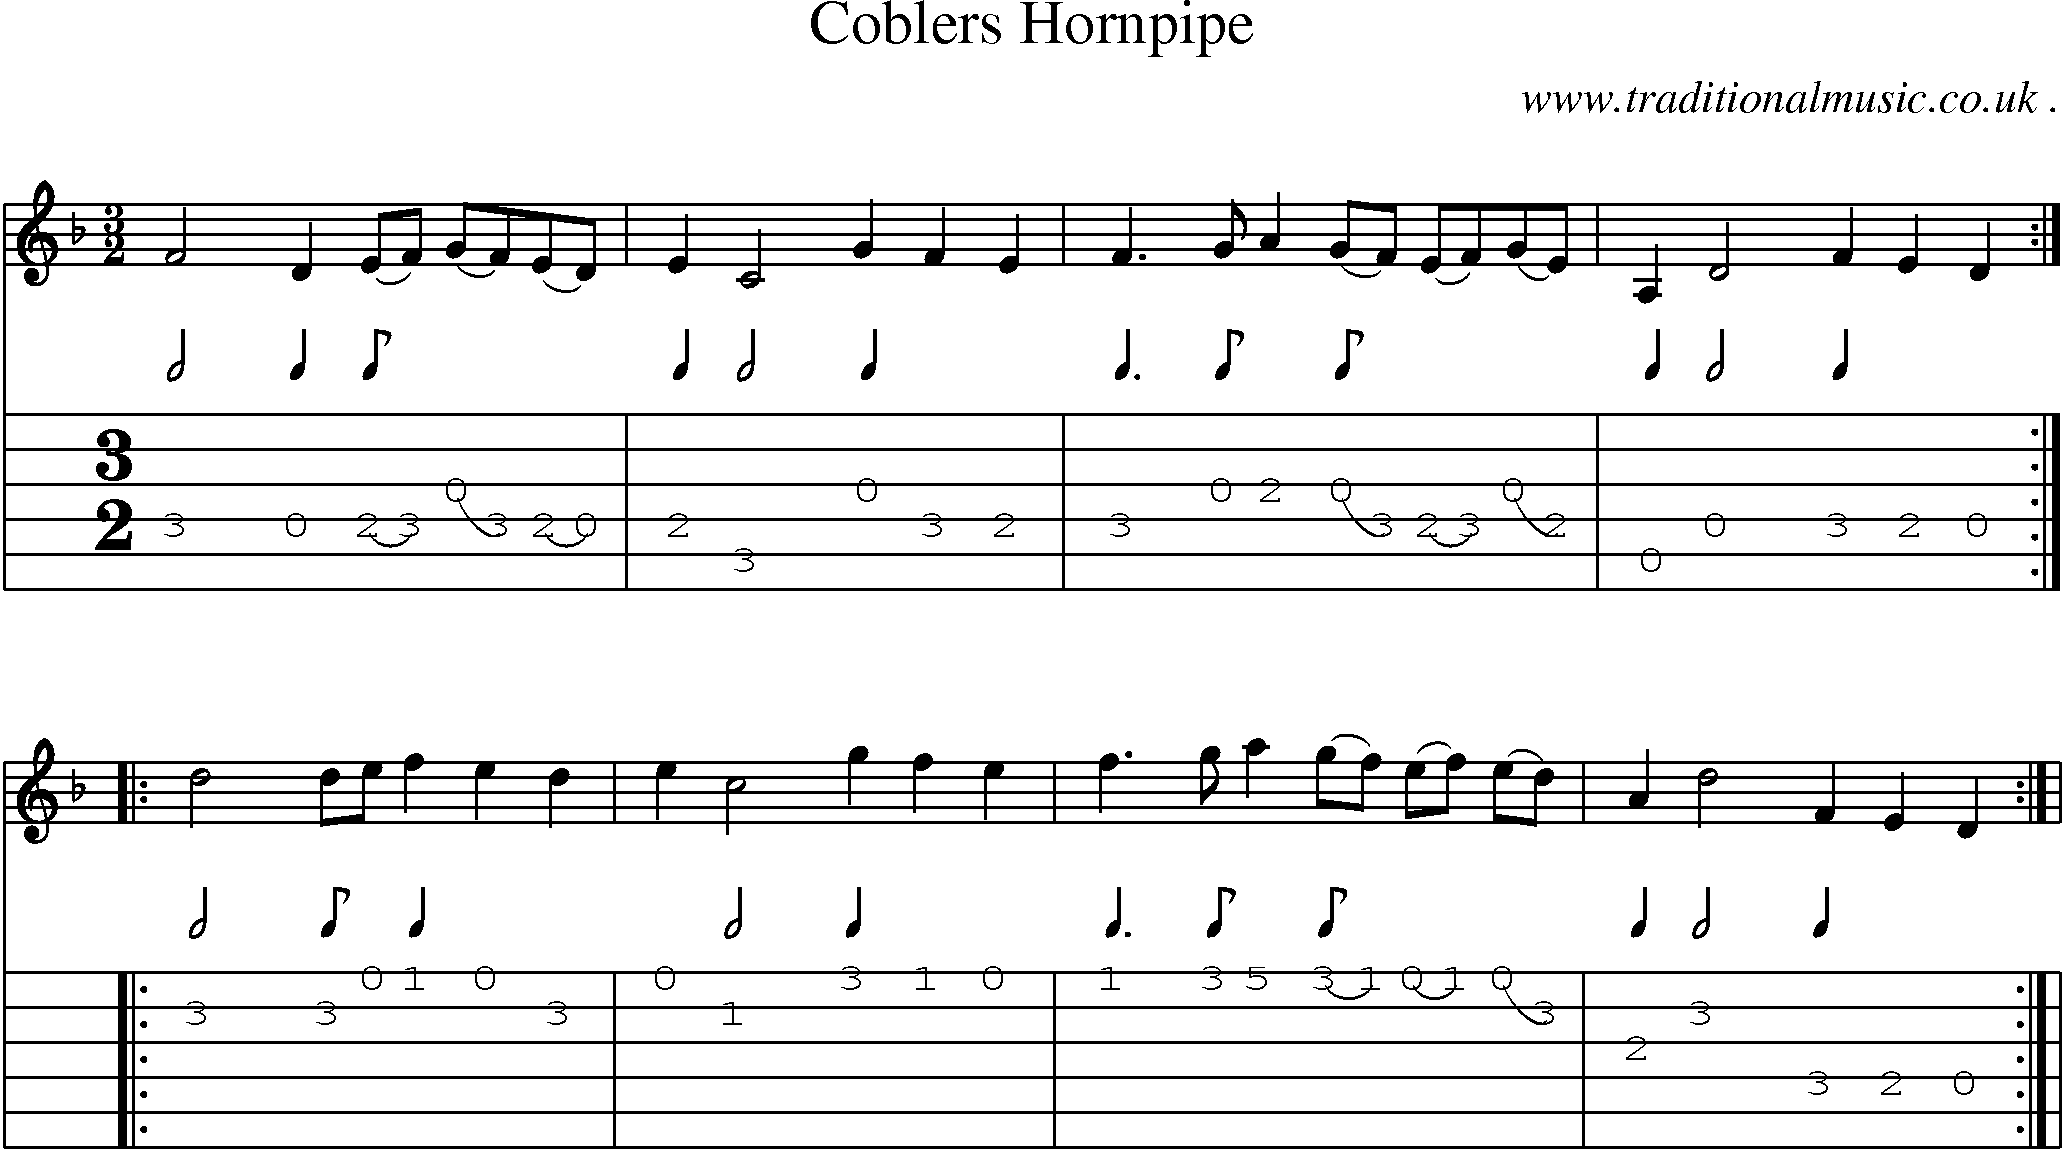 Sheet-Music and Guitar Tabs for Coblers Hornpipe